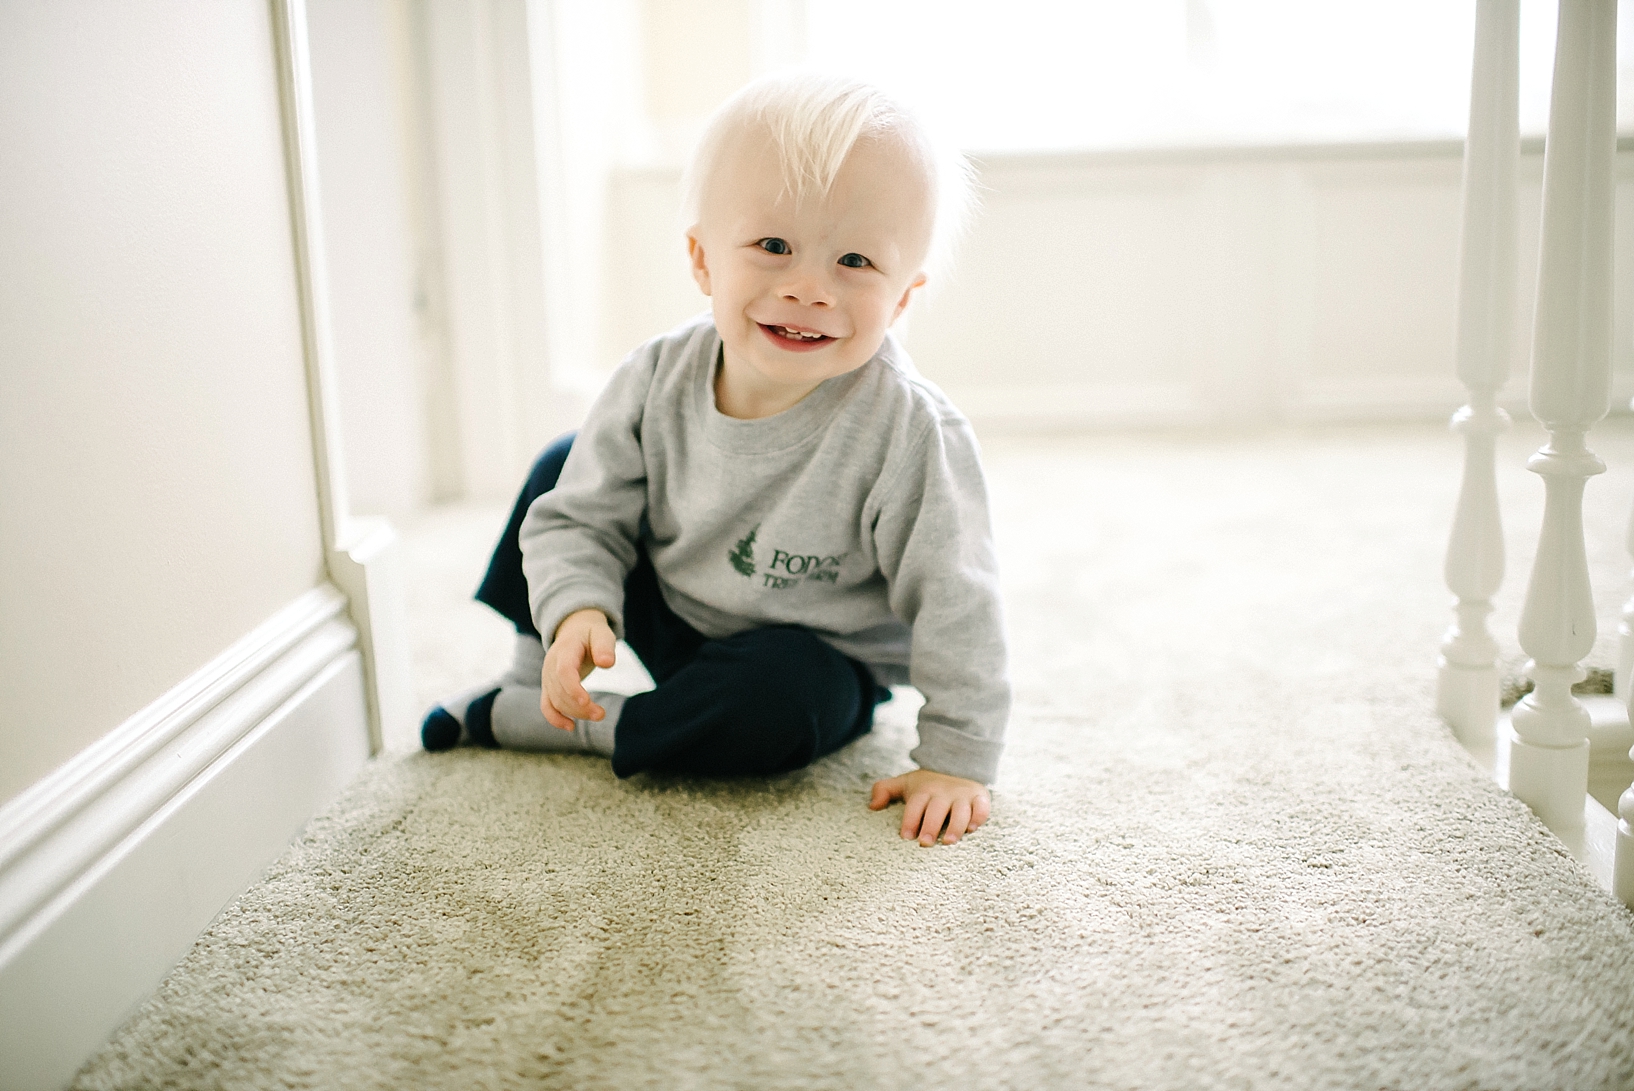 18 month old boy sitting on floor by window smiling